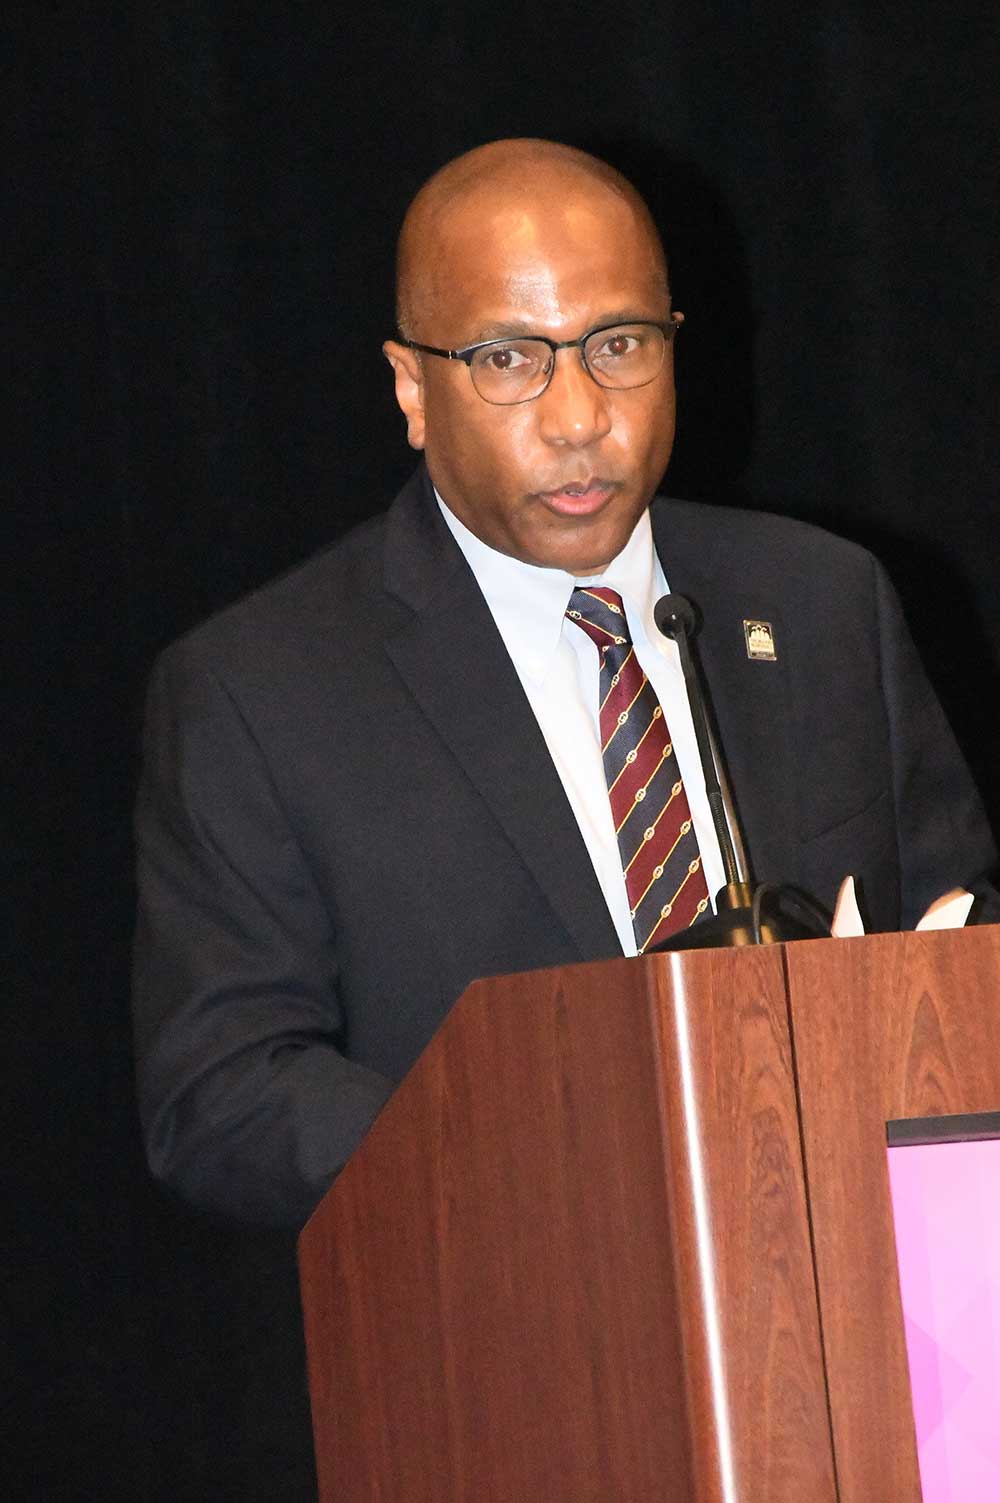 Past Delaware State University President Harry L. Williams spoke at the event as the CEO of the Thurgood Marshal College Fund. 